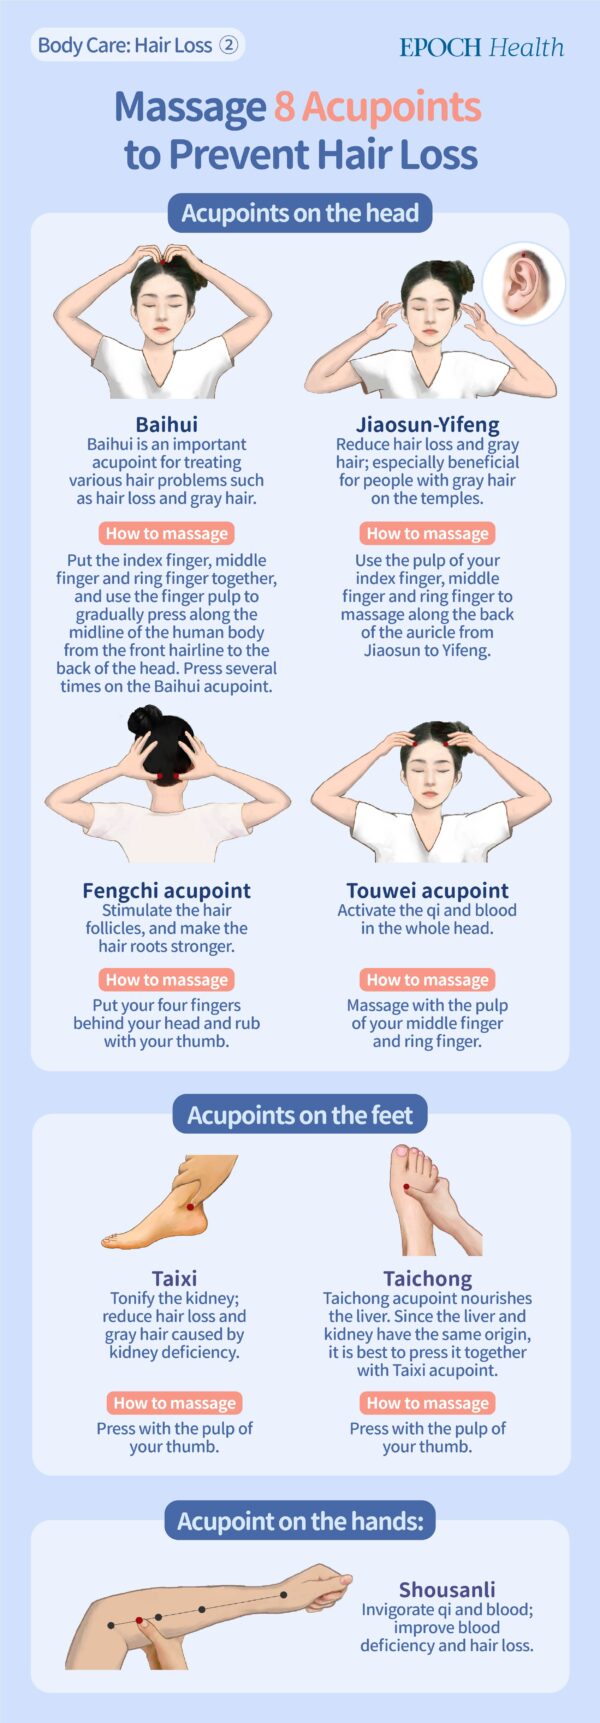 Massage the acupoints on the head, feet and hands